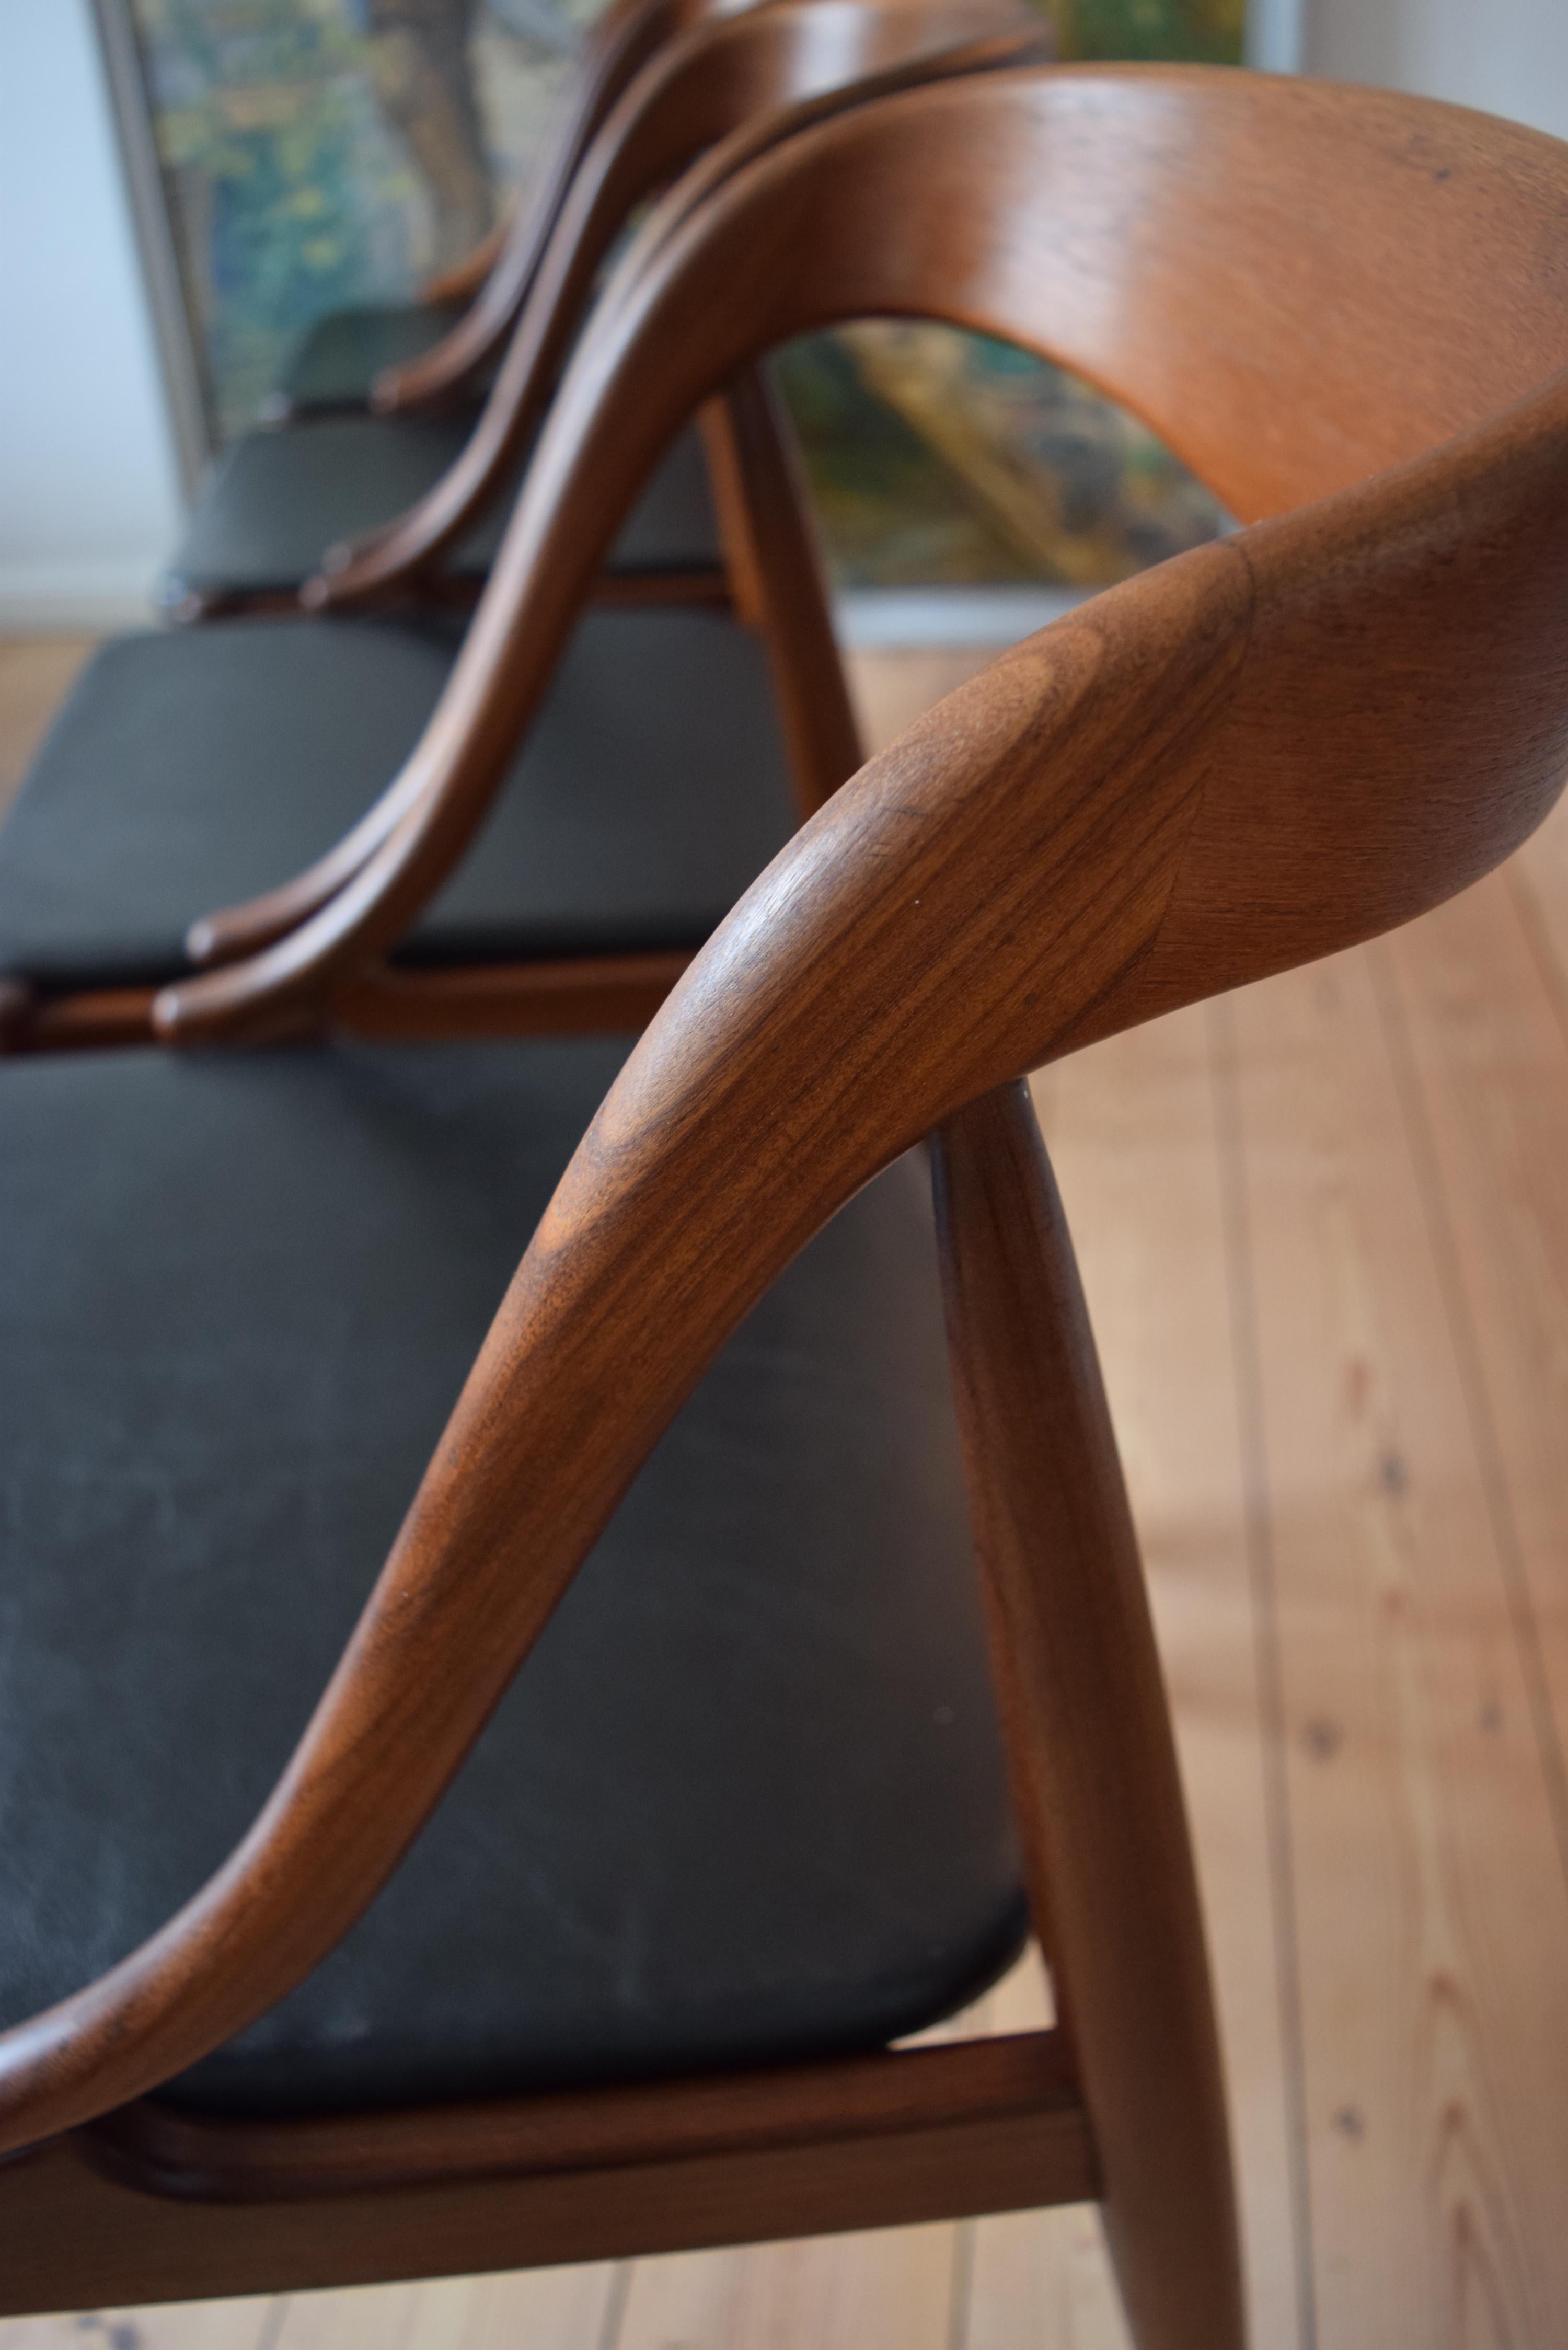 Set of four teak dining chairs by Johannes Andersen for Uldum Møbelfabrik Denmark, manufactured in the 1950s-1960s. The frame is made of teak and the seats are covered in black leather. This model features a deep curved backrest for extra comfort.